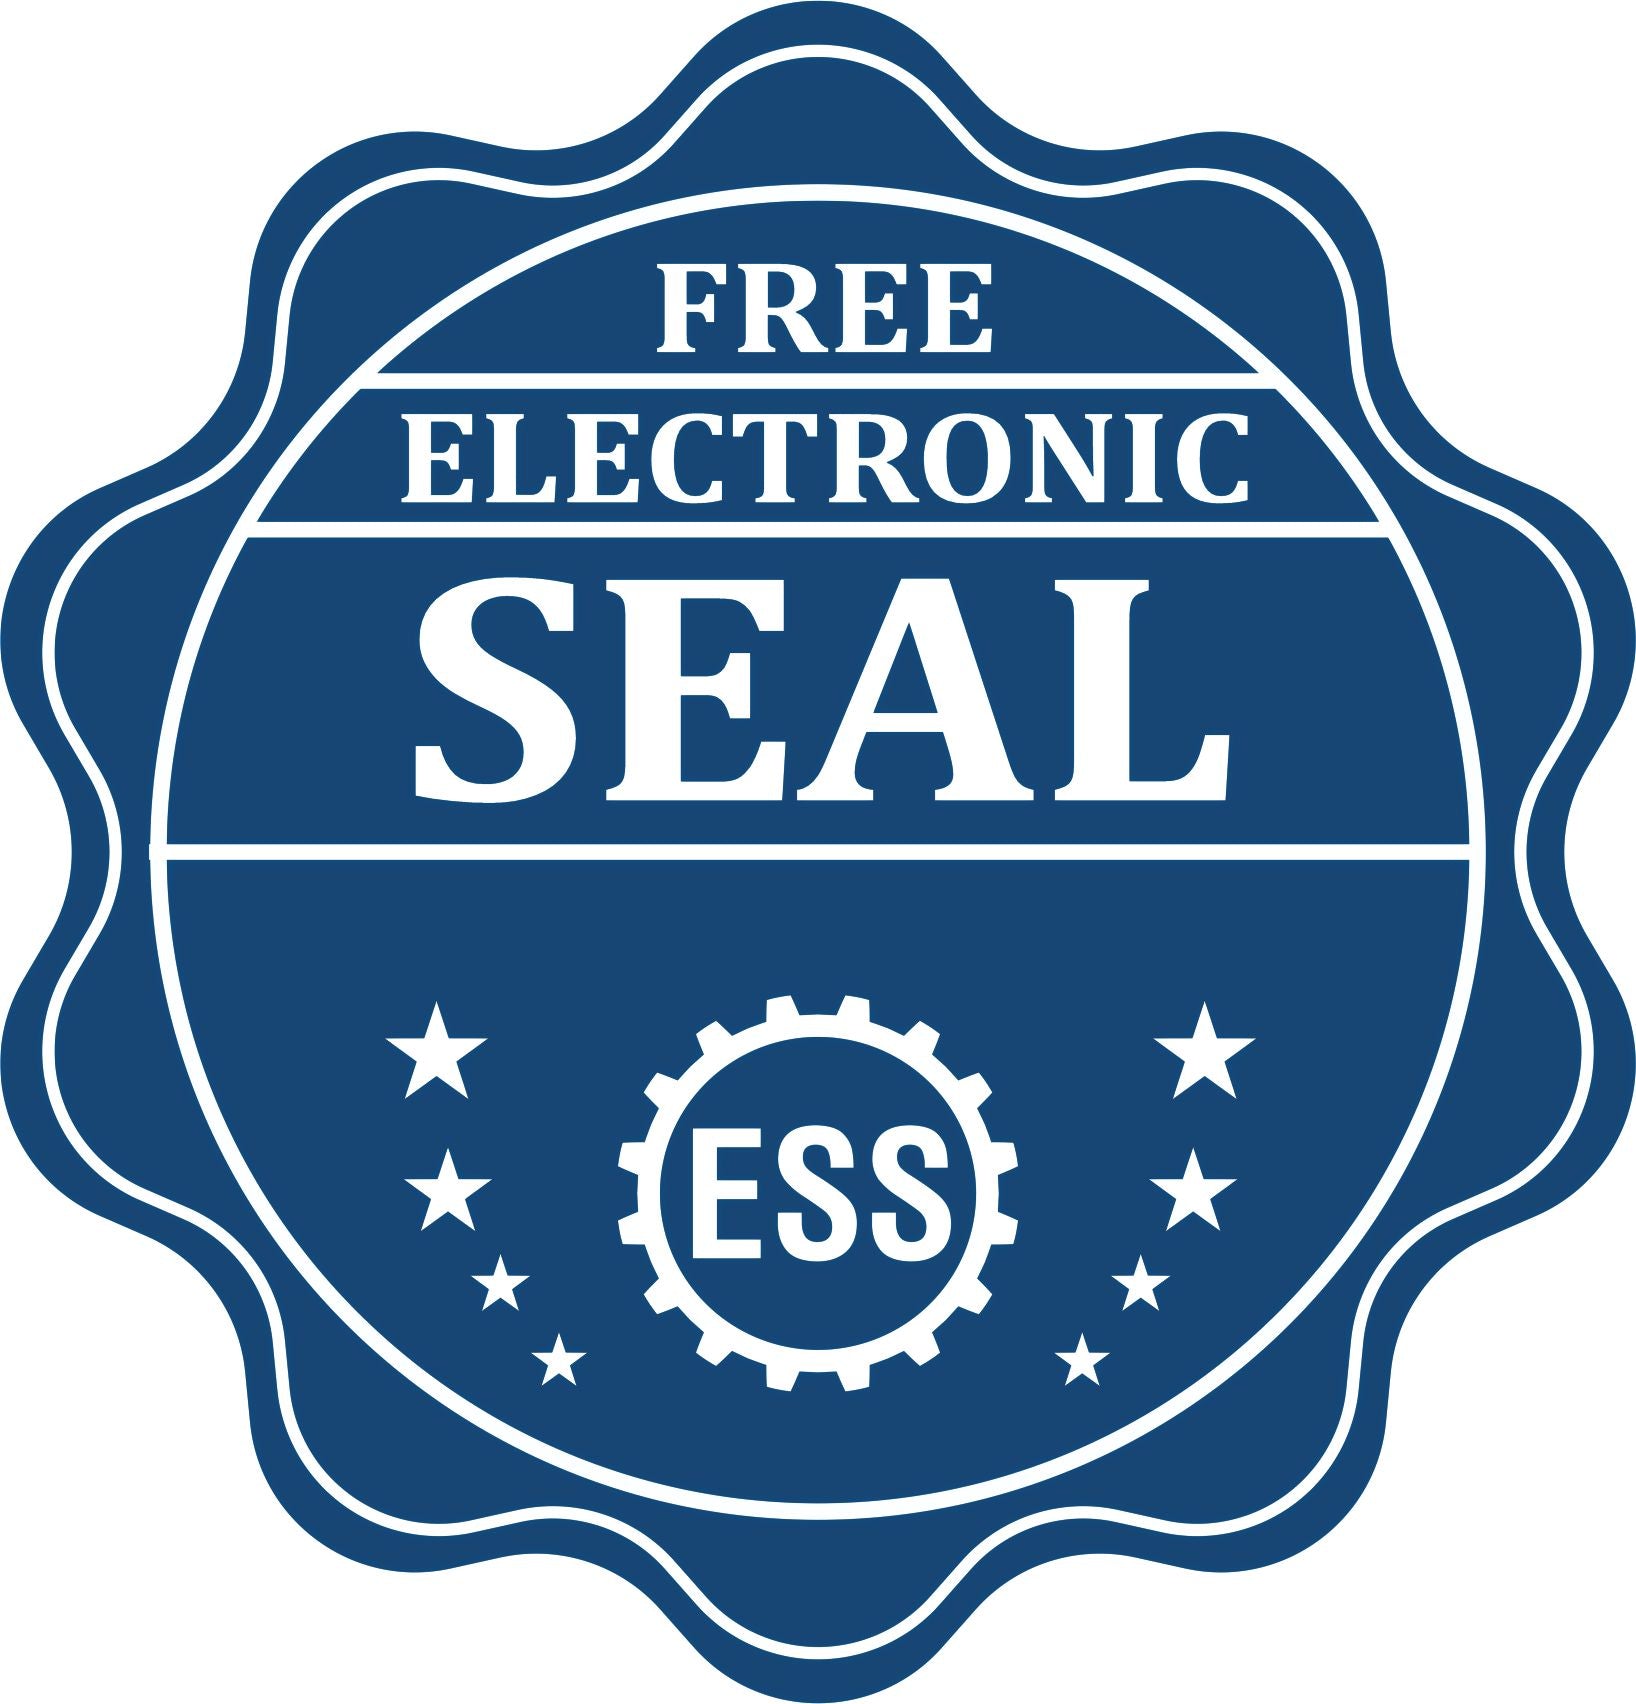 A badge showing a free electronic seal for the Premium MaxLight Pre-Inked Puerto Rico Engineering Stamp with stars and the ESS gear on the emblem.